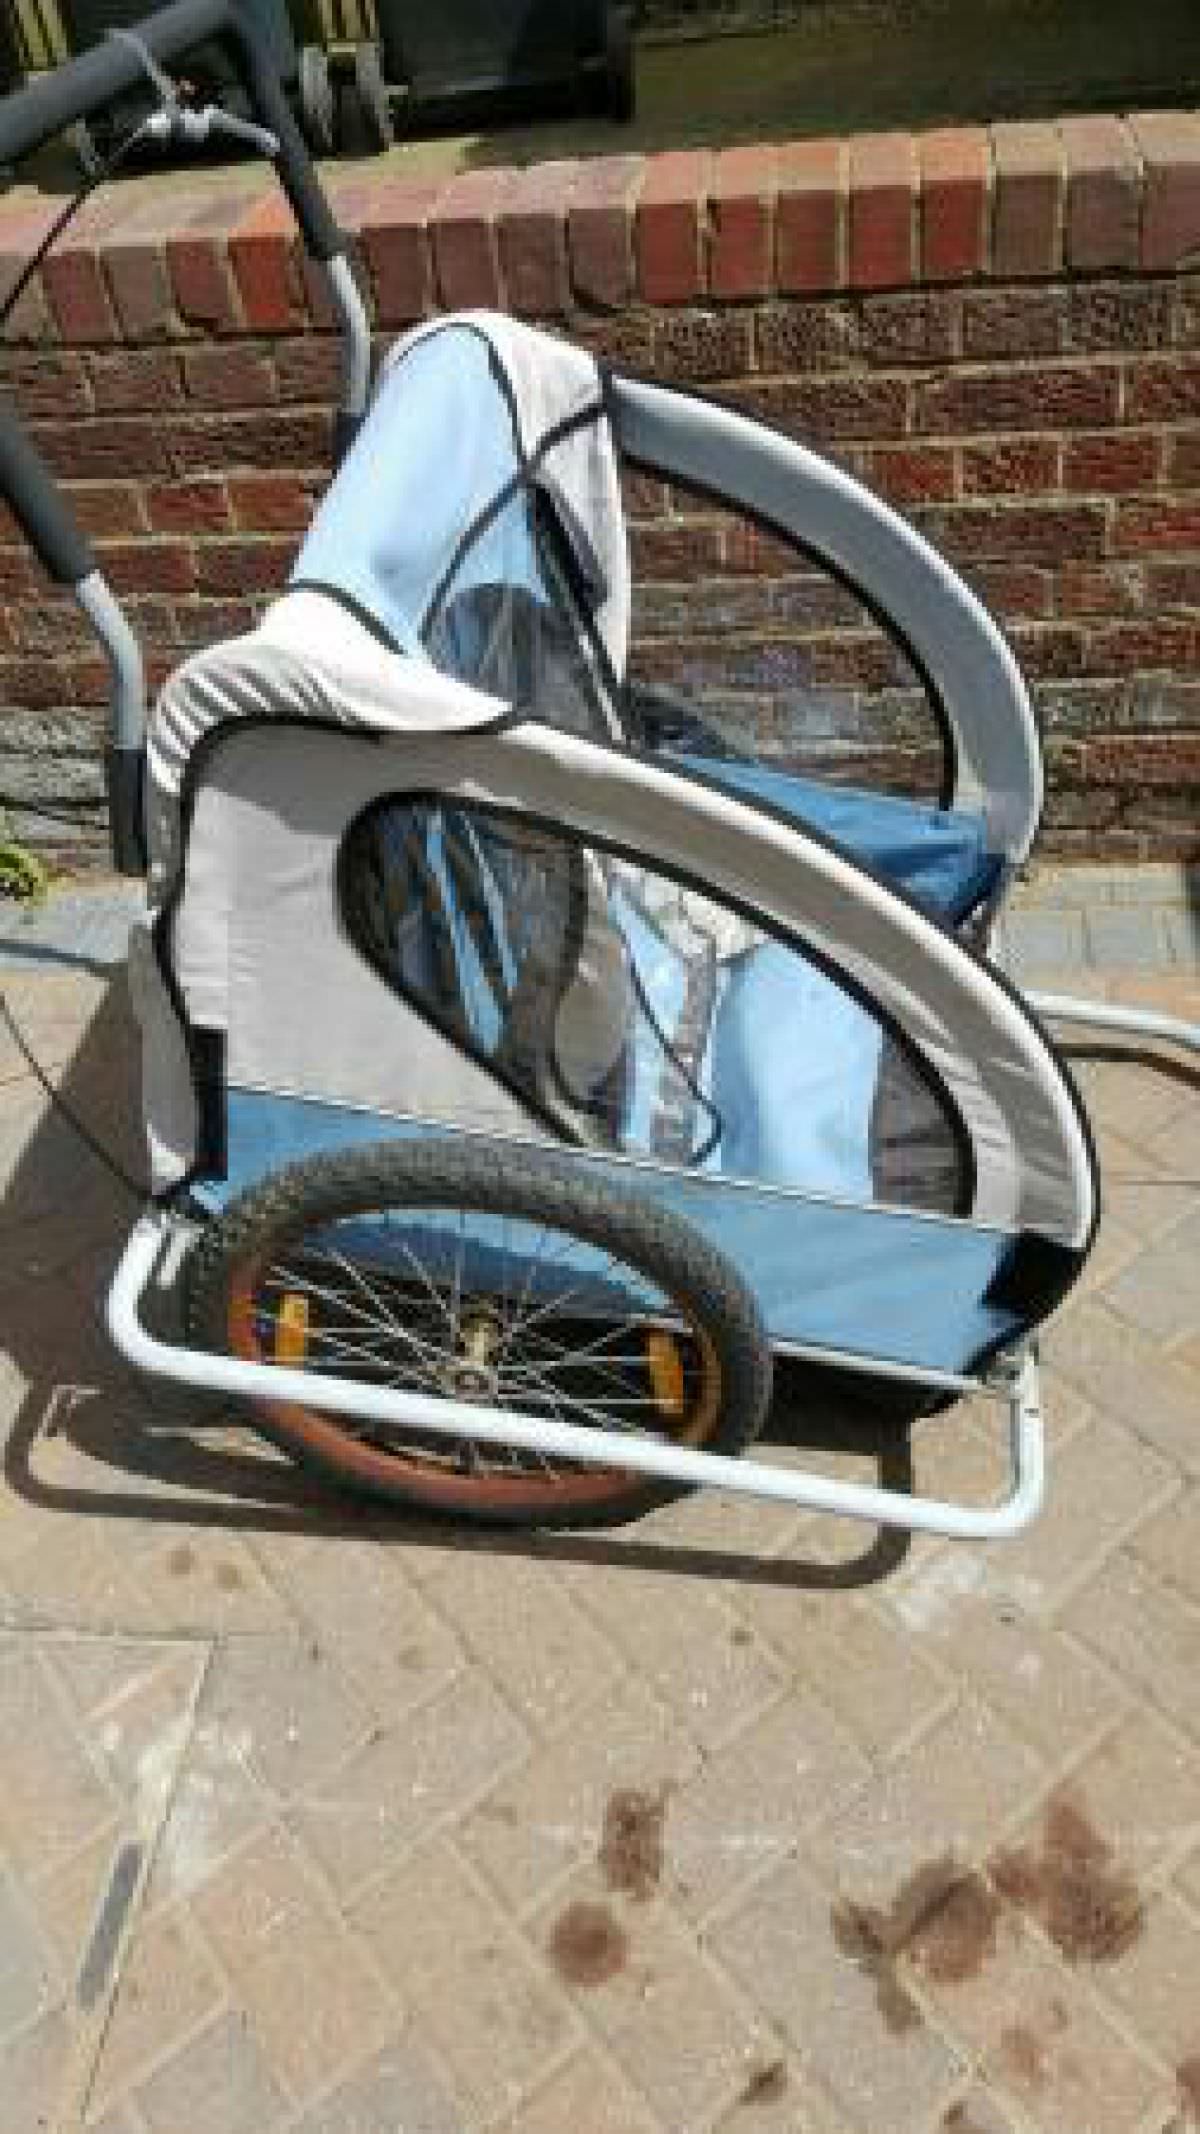 2 seater cycle trailer